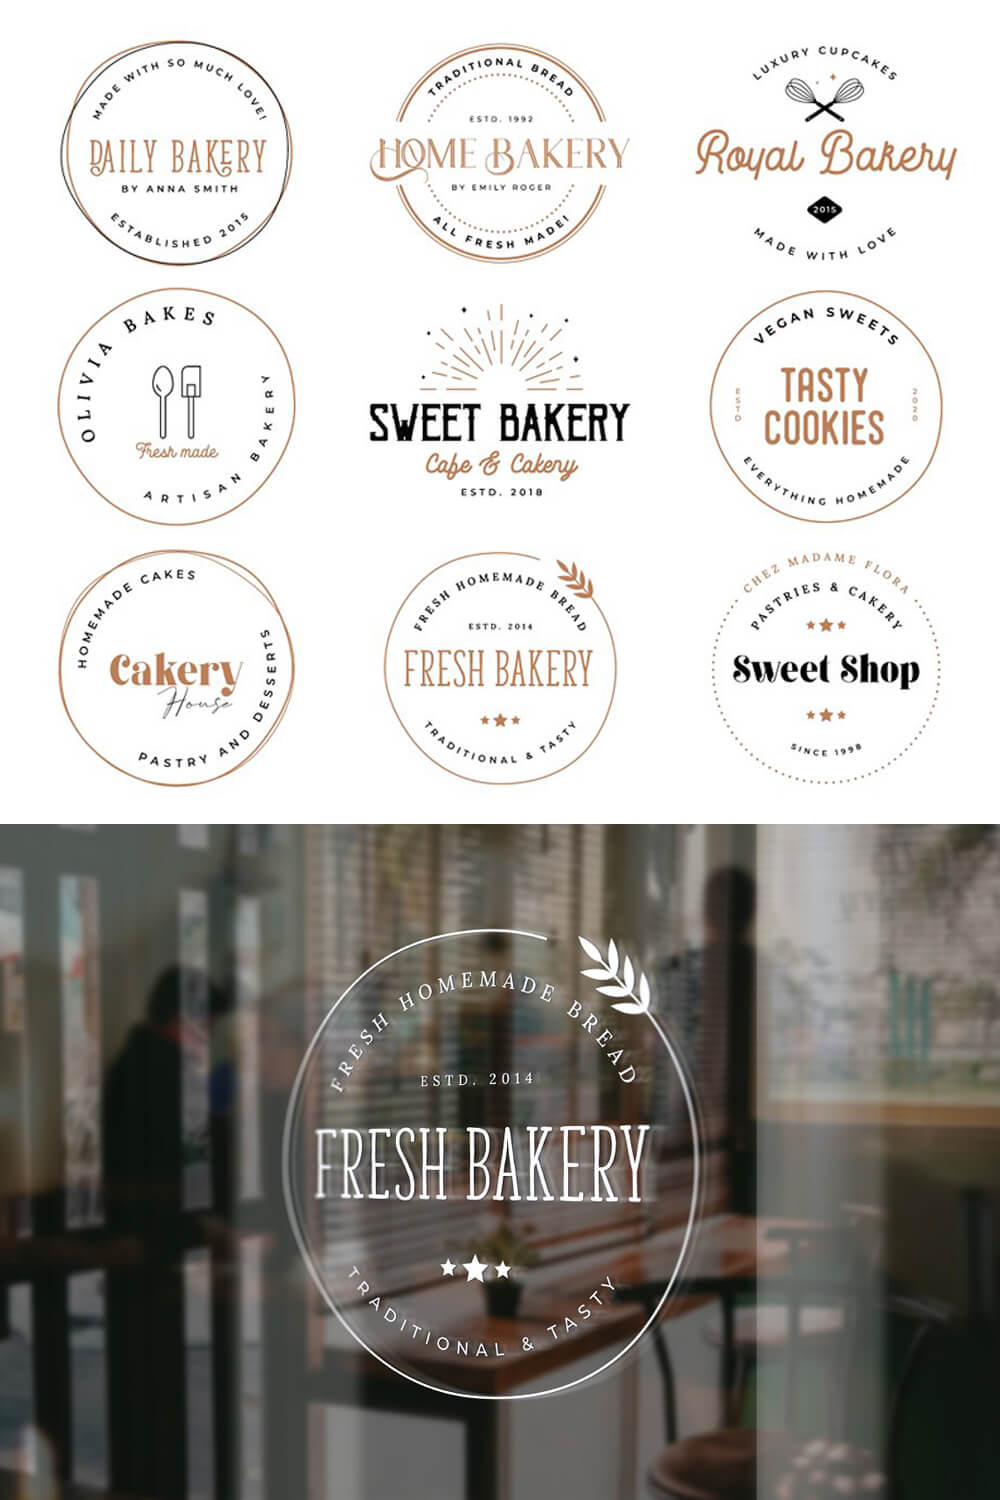 Nine bakery logos on a white background and a large bakery logo on a blurry background.